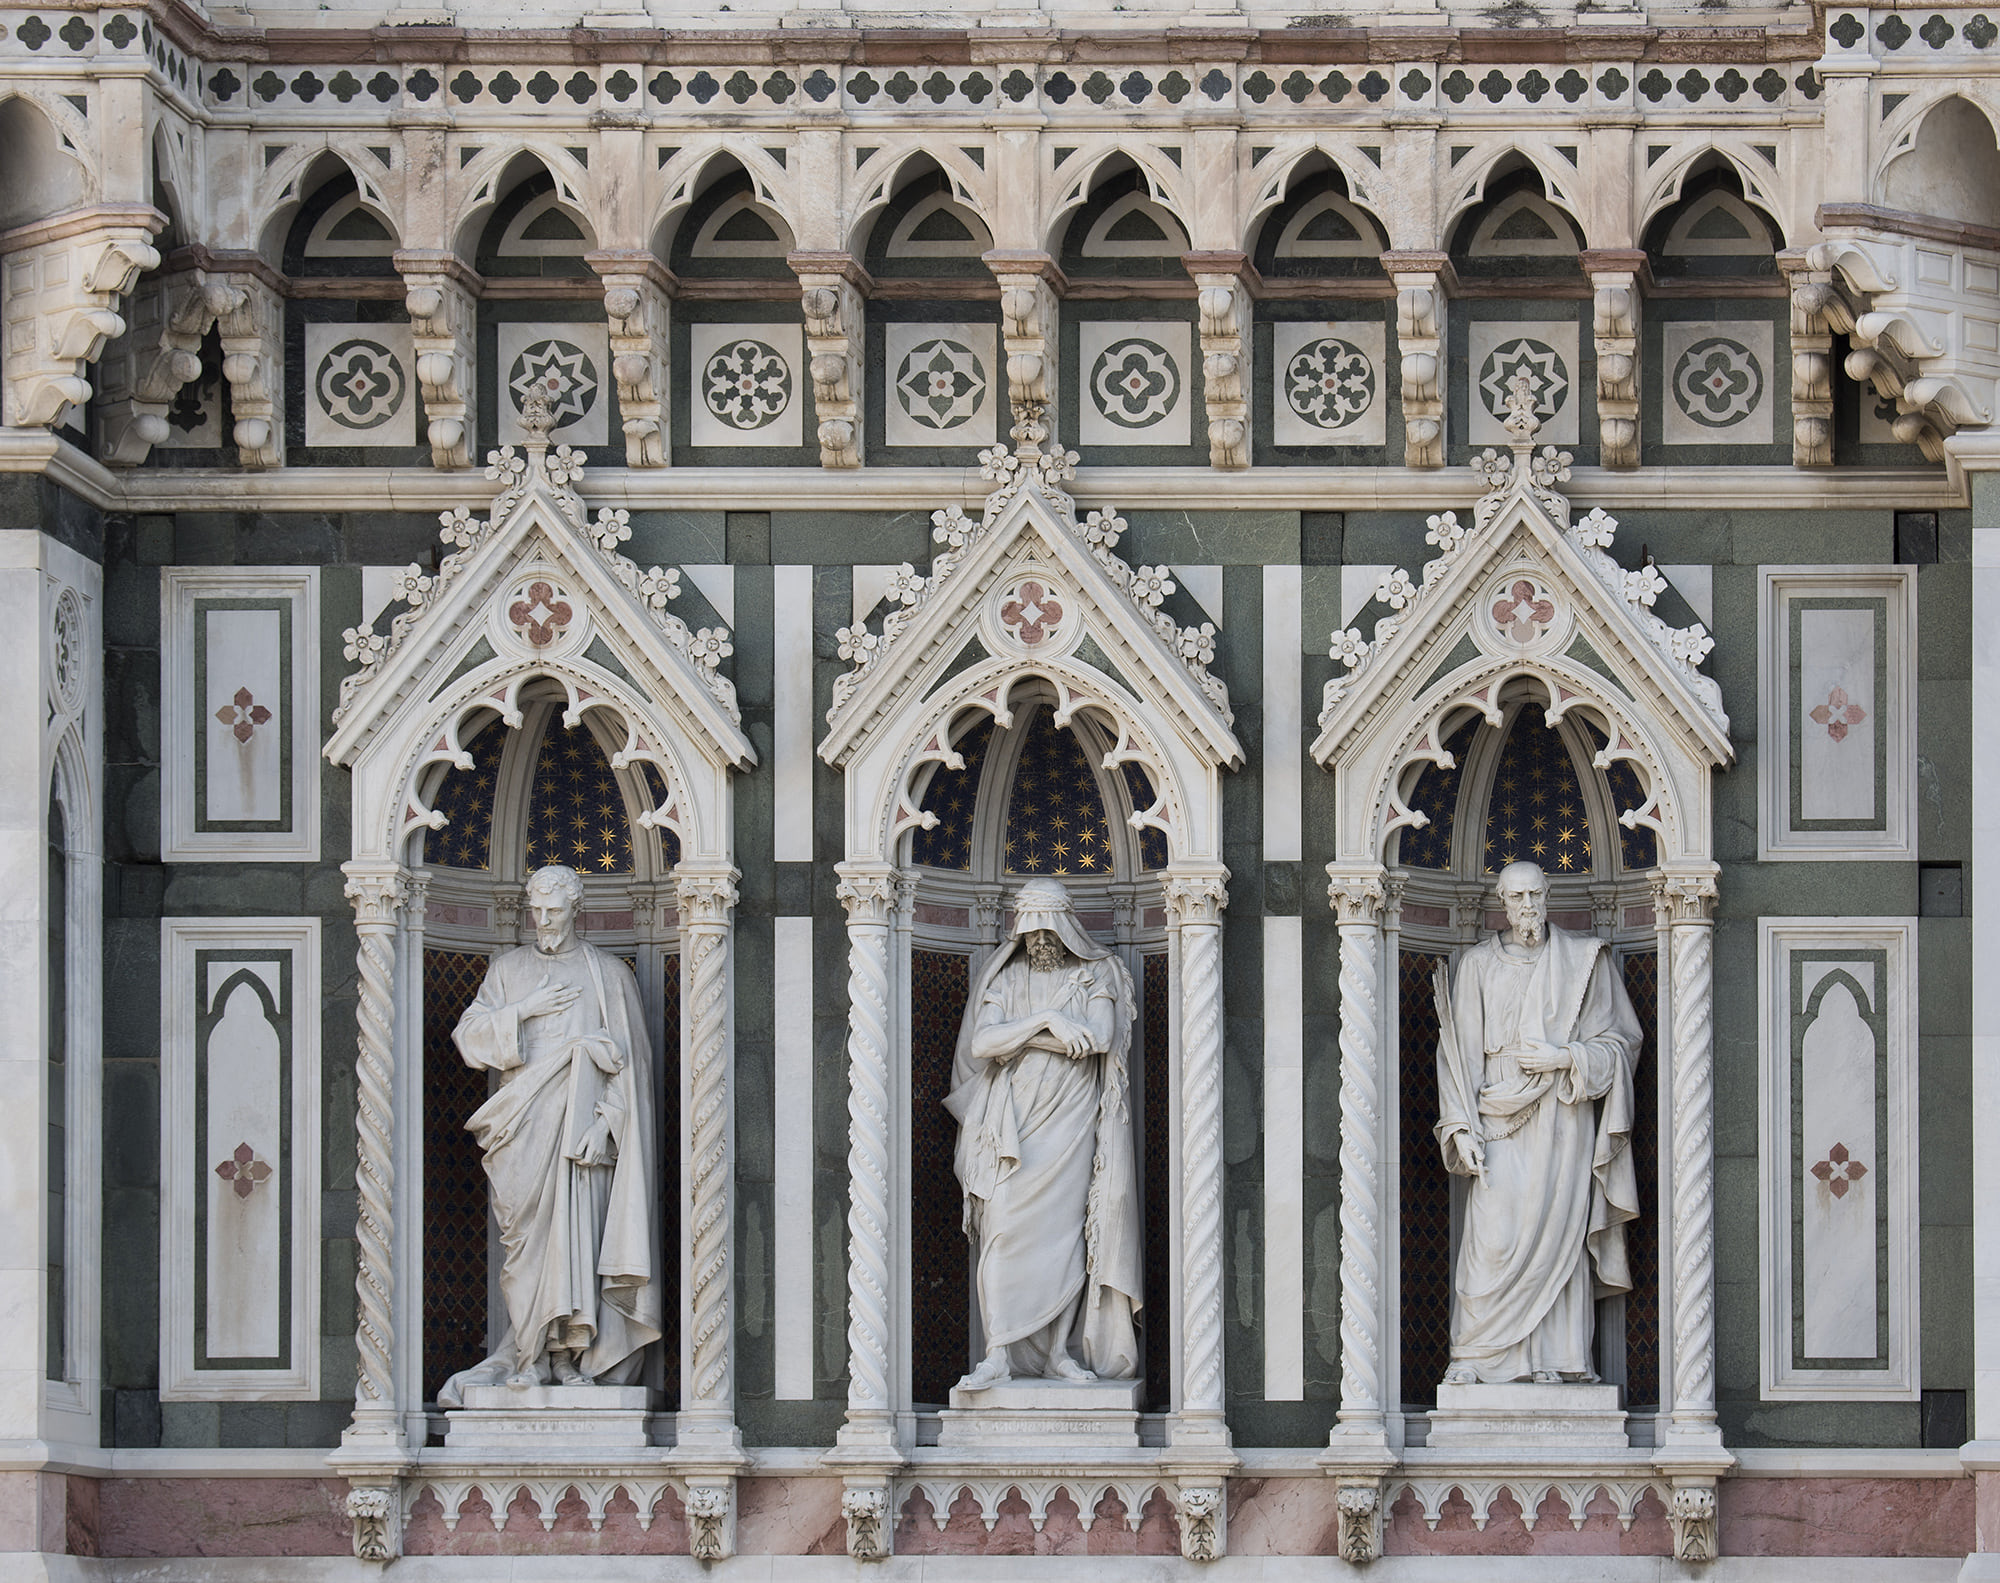 Facade detail, Florence Cathedral